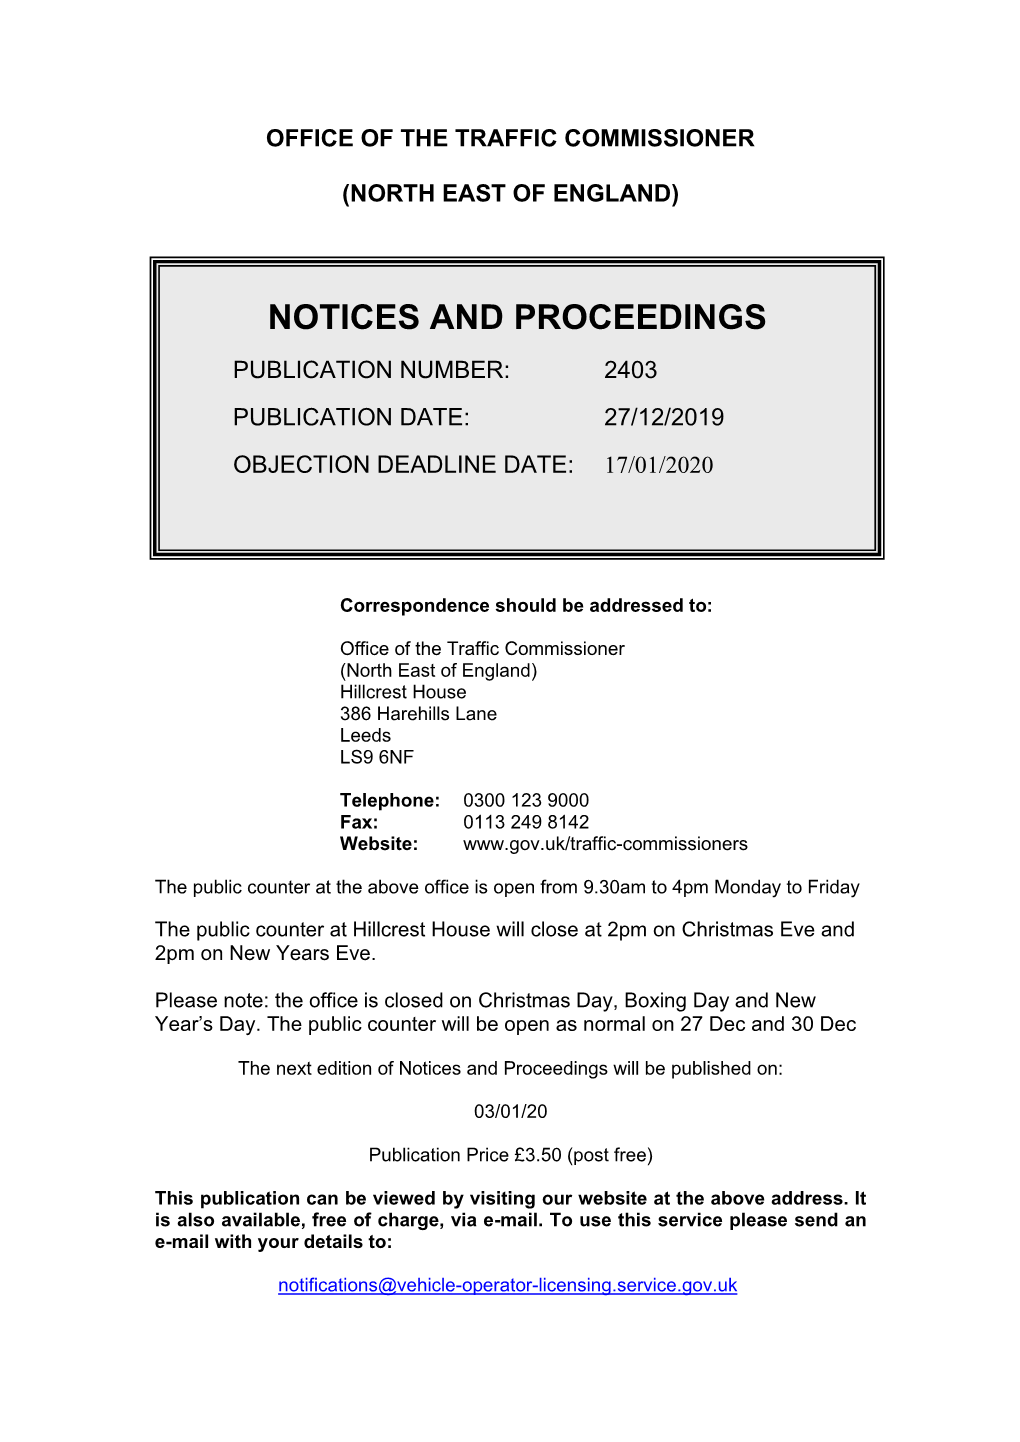 Notices and Proceedings for the North East of England